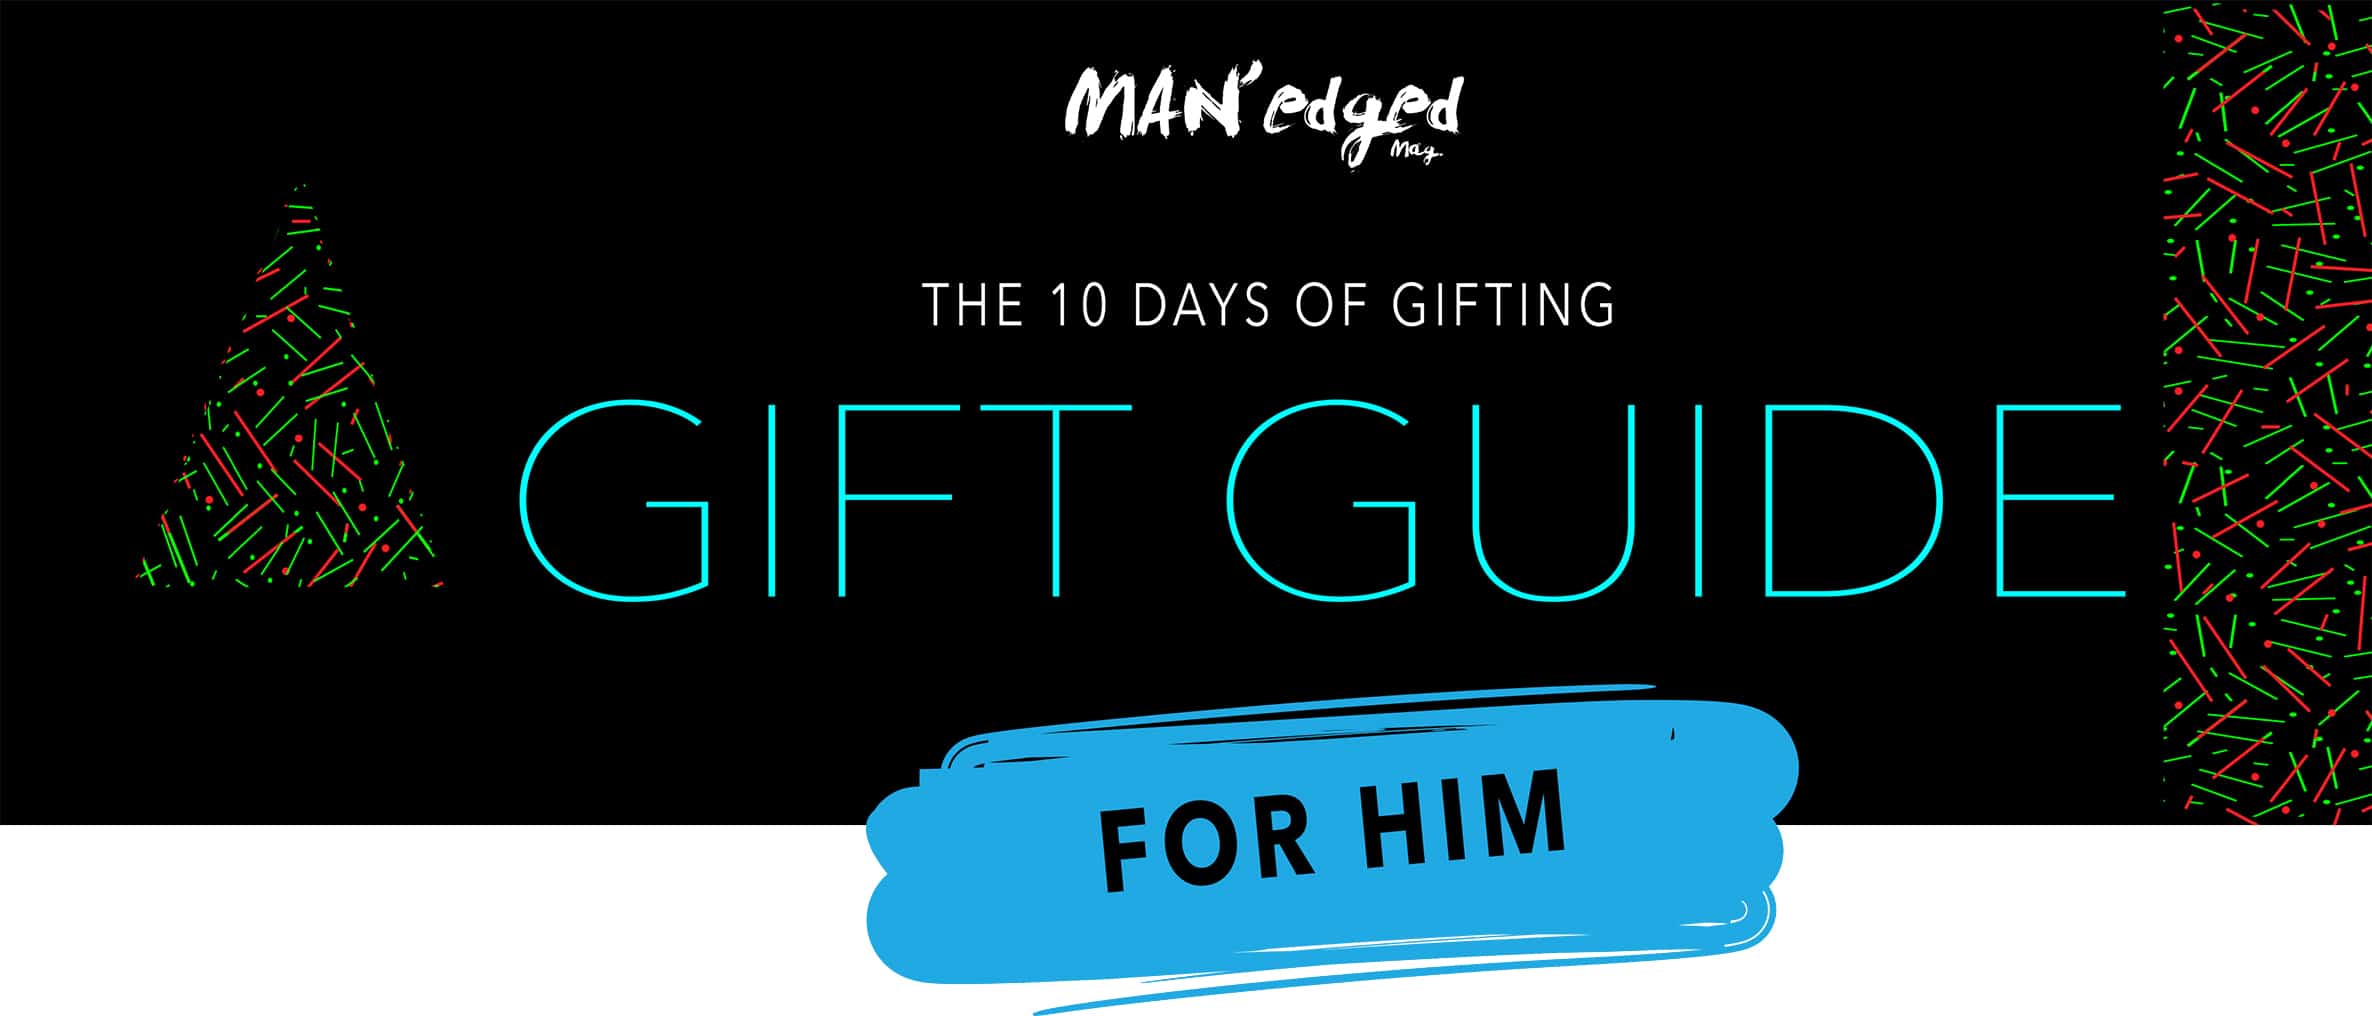 men's gift guide, ken wroy, underwear, men's gift guide, control sector, button up shirt,men's gift guide, control sector, shirt, michael william g, editor's note, letter from editor, man'edged.com, man'edged.com magazine, manedged magazine, MAN'edged magazine, MAN'edged mag, menswear, nyc, new york city, men's fashion, men's style, style, men's look, camel wool coats, camel, wool, coat, this or that, holiday, holiday gift, holiday gift guide, gift, gifting, mens gift guide, guide, gift guide, holiday gift guide, rochambeau nyc, rochambeau, FRIGO, men's underwear